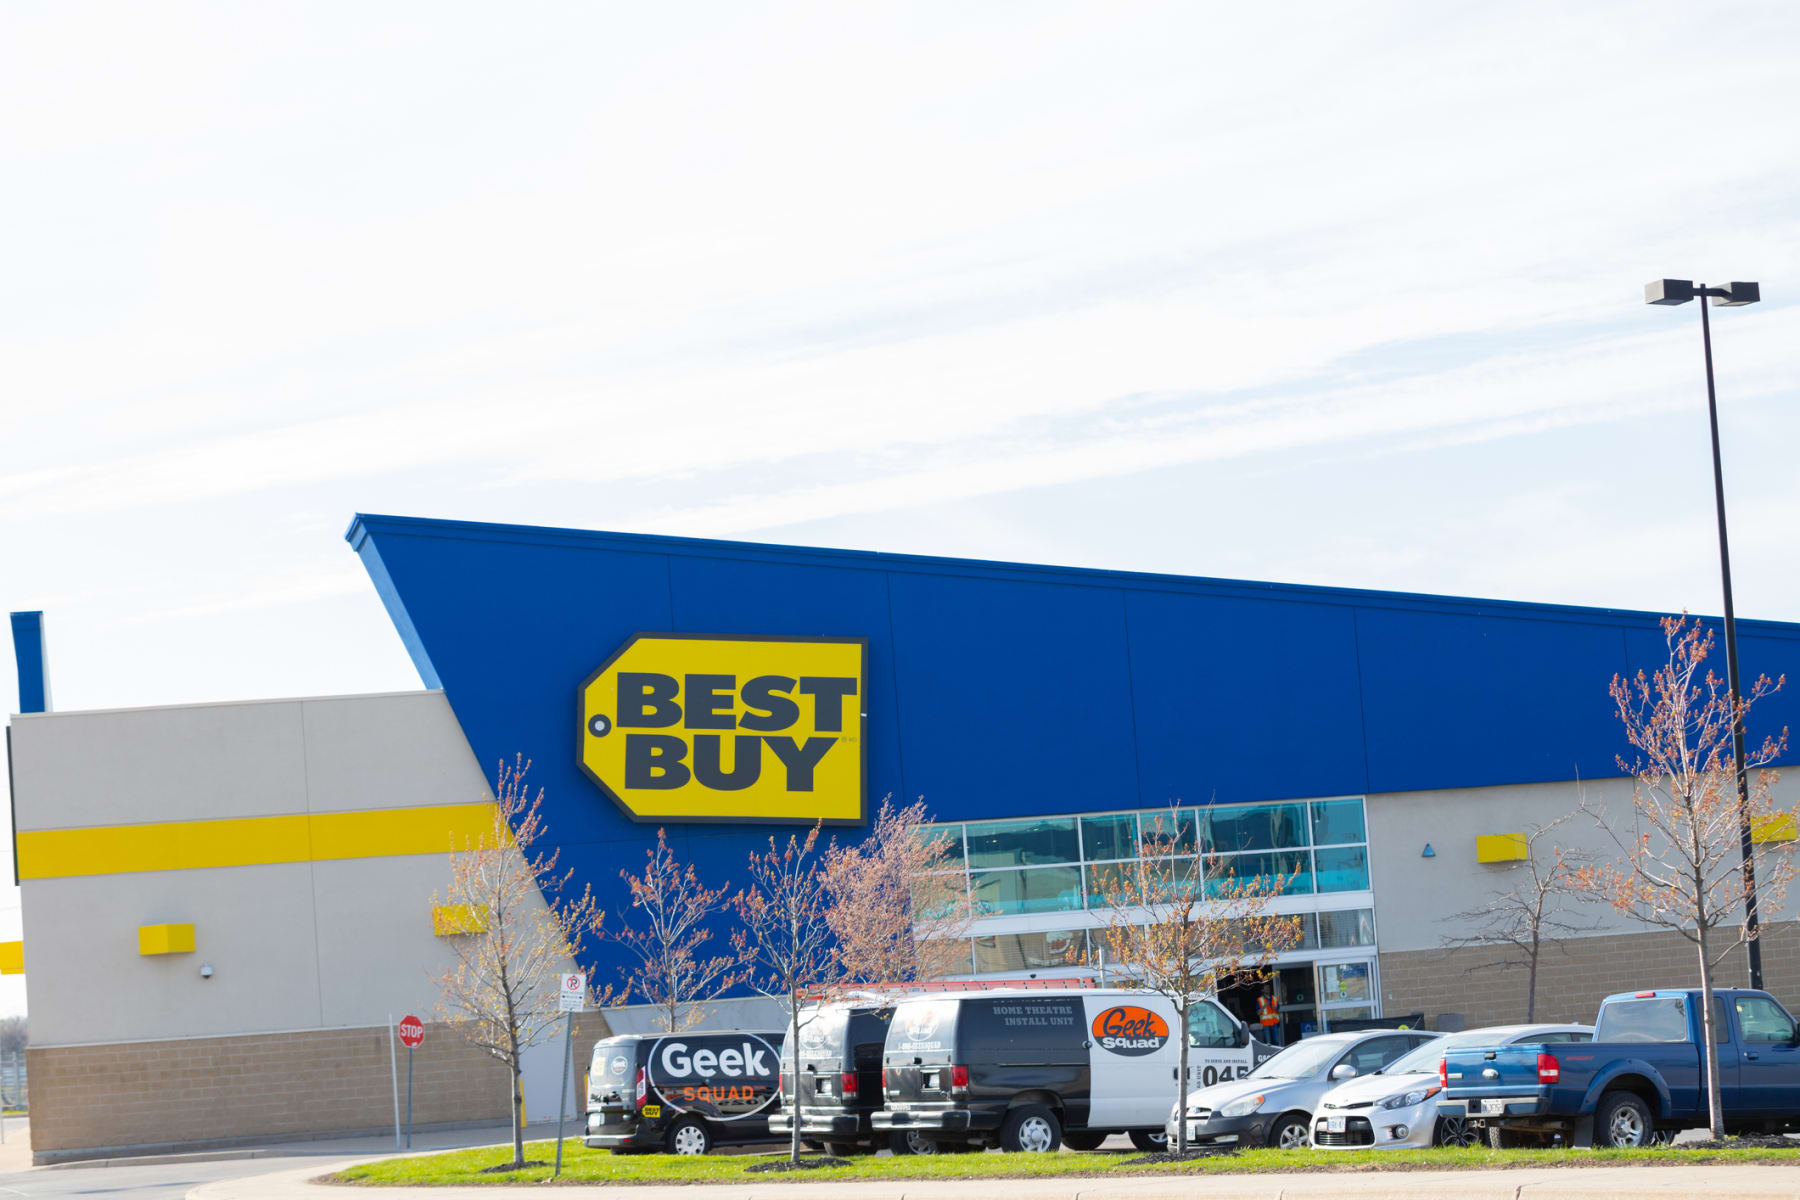 A Best Buy store and car park.